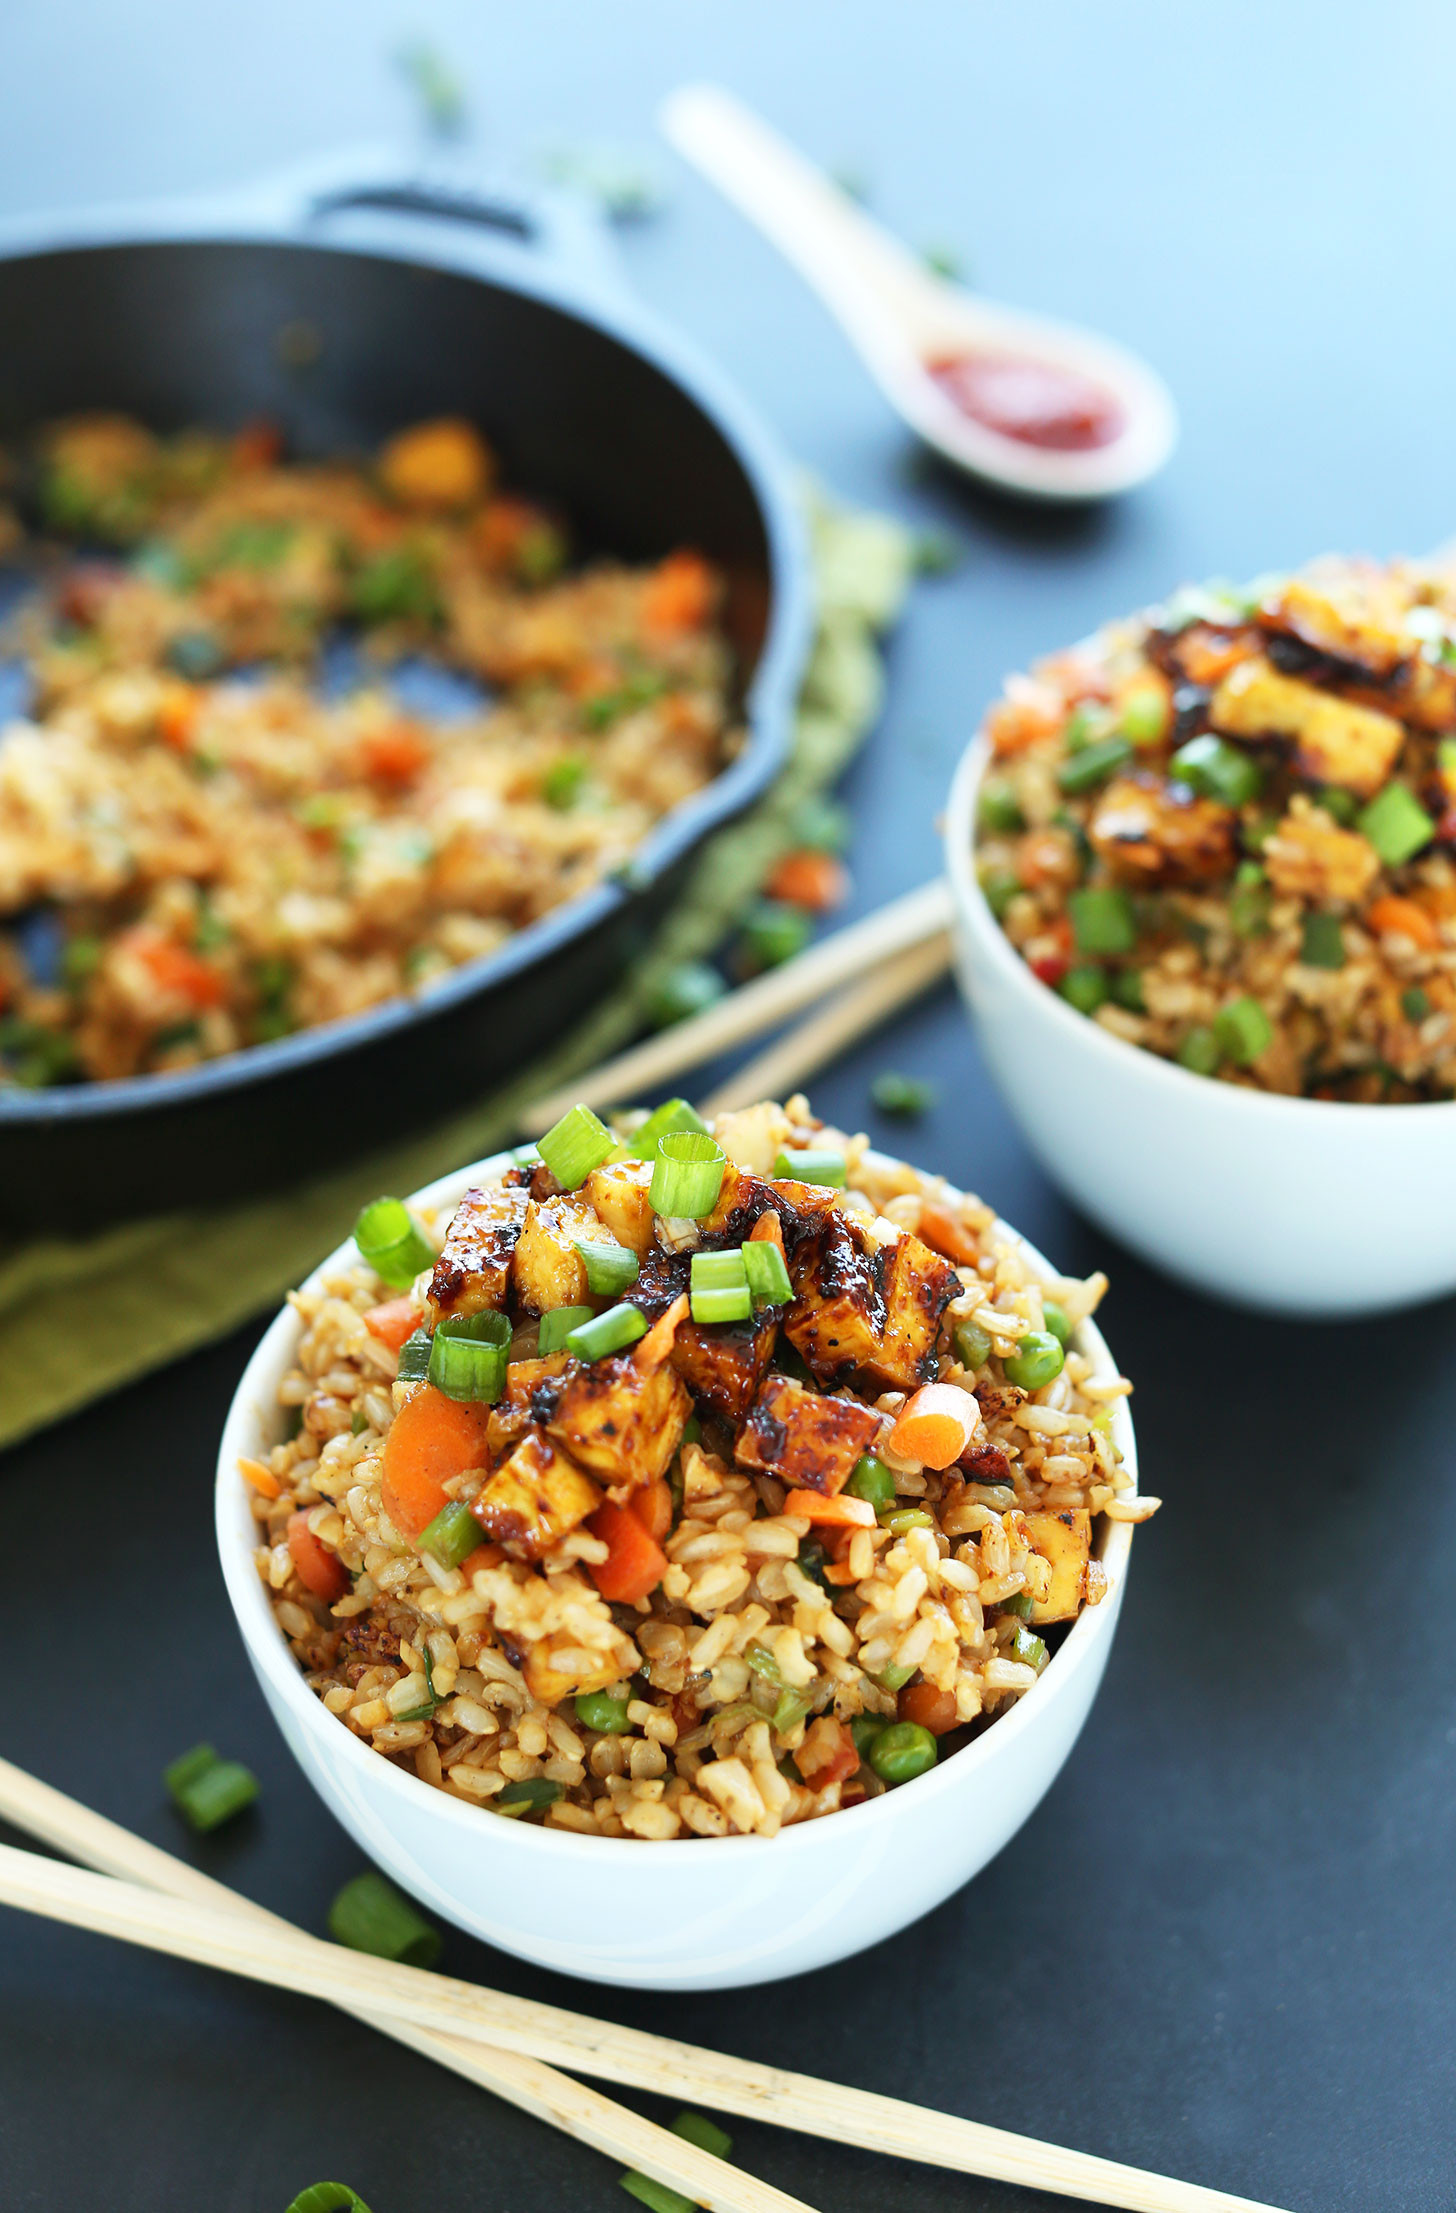 Easy And Healthy Vegetarian Recipes
 Vegan Fried Rice